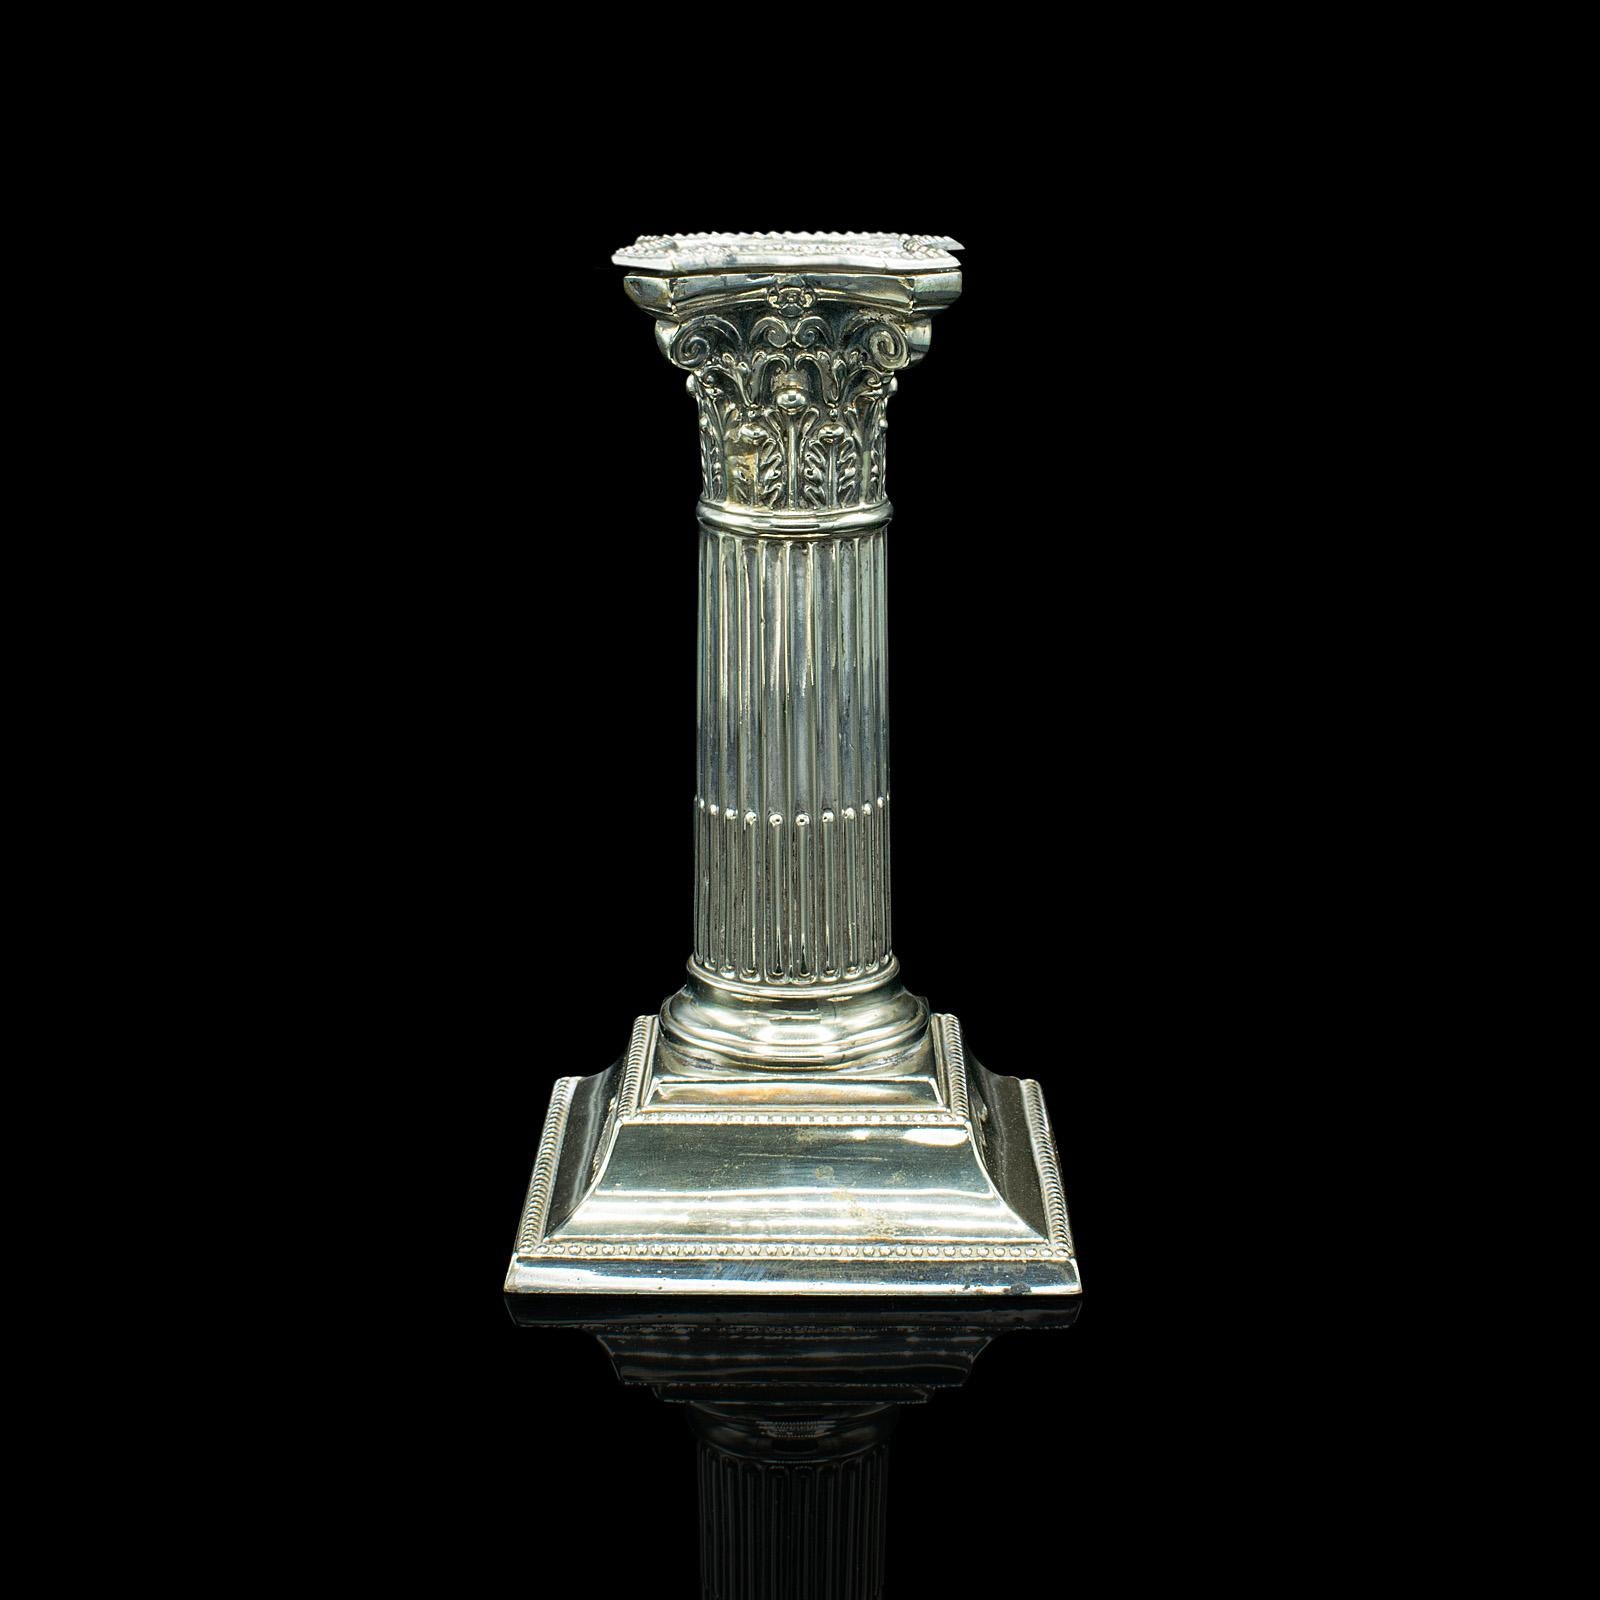 Pair of Antique Decorative Candlesticks, Italian, Silver Plate, Grand Tour, 1860 For Sale 1